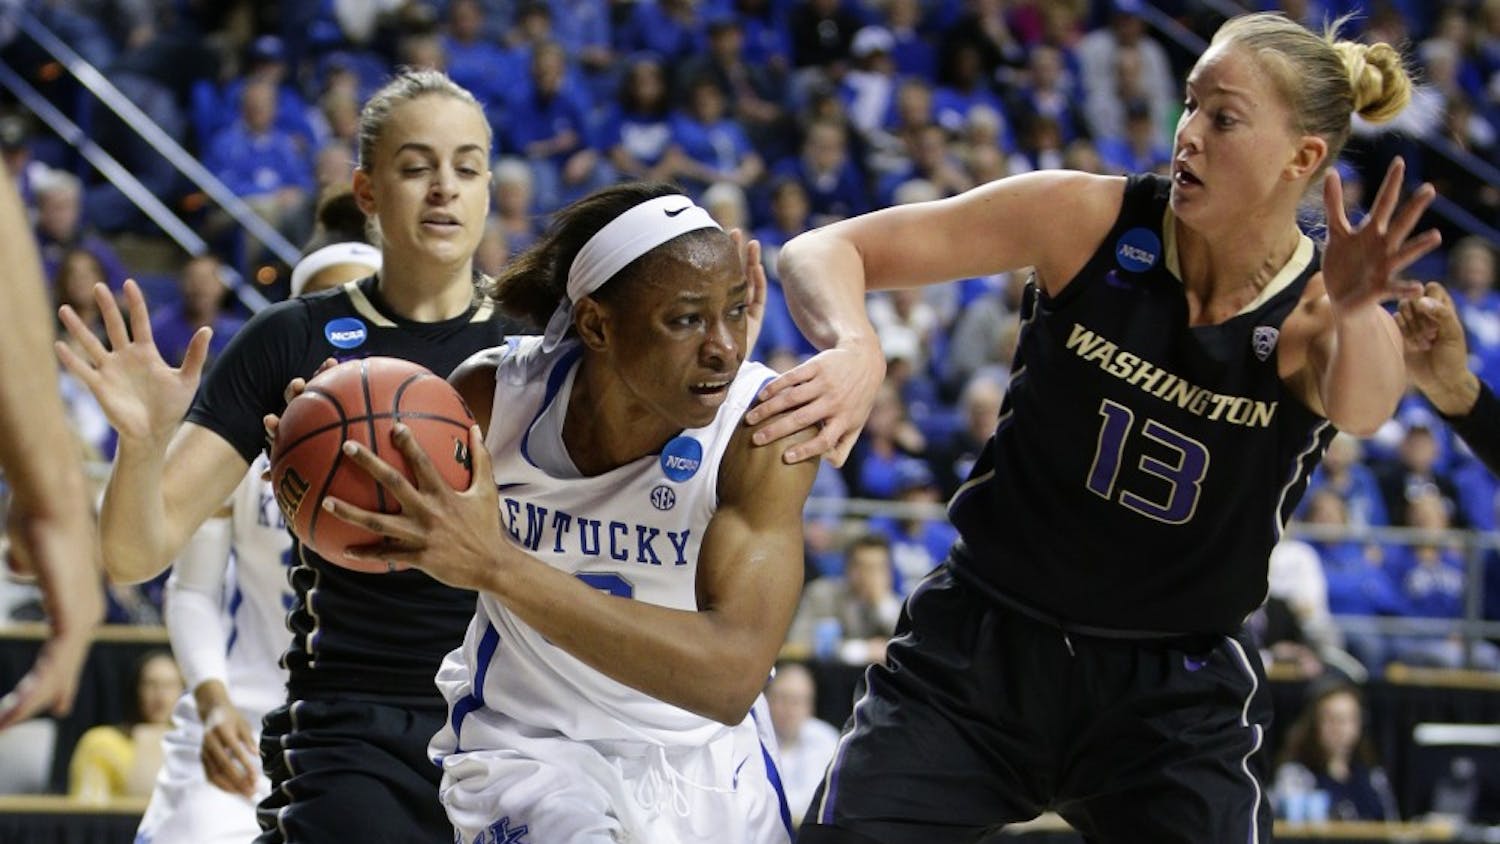 Kentucky's Evelyn Akhator, middle, looks to pass after grabbing a rebound in front of Washington's Katie Collier, right, in the third round of the NCAA Tournament on Friday, March 25, 2016, at Rupp Arena in Lexington, Ky. (Mark Cornelison/Lexington Herald-Leader/TNS)